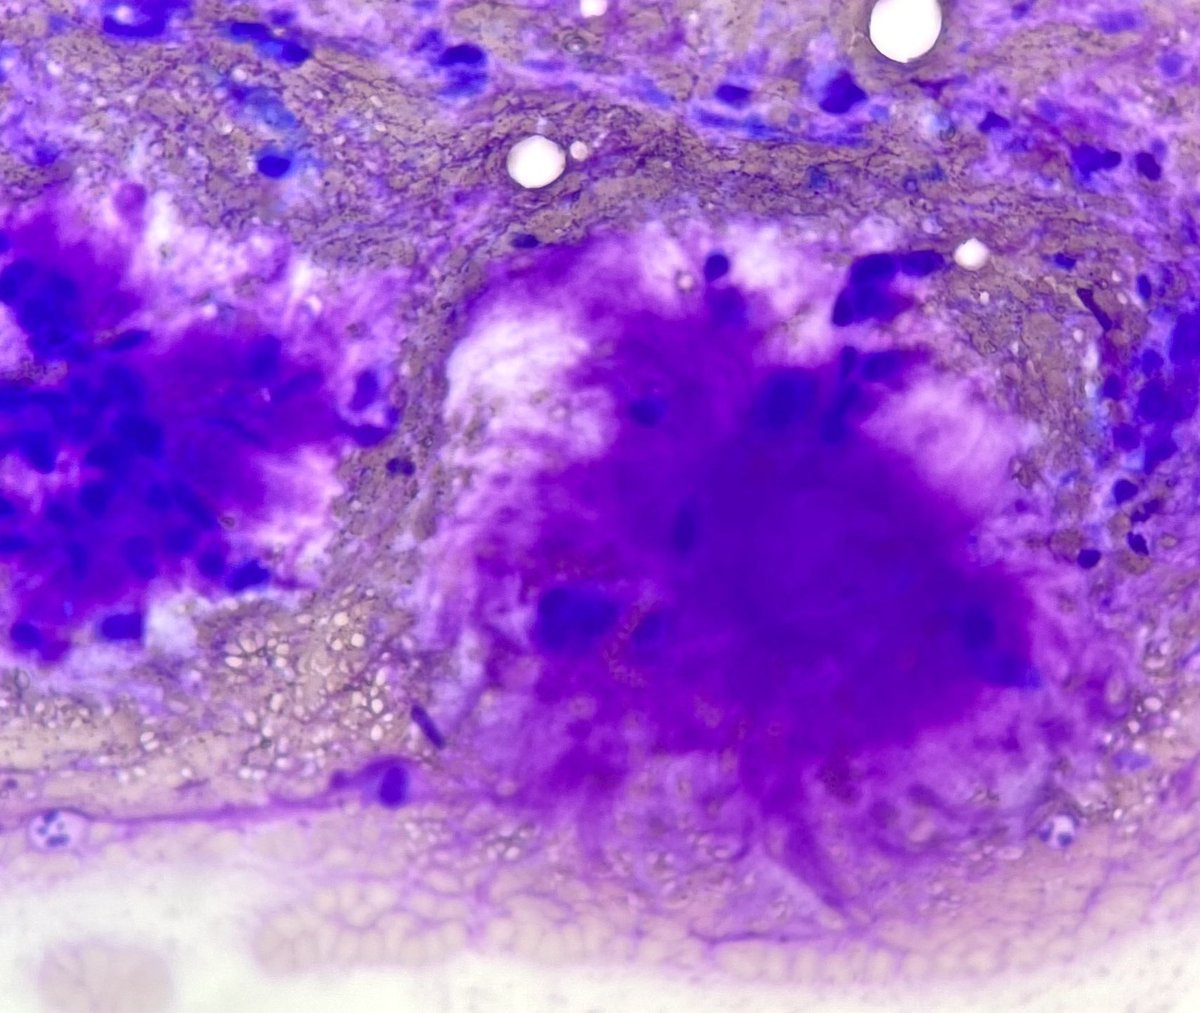 Parotid mass FNA - you can’t rely on architecture in Cytology, but the Chondromyxoid stroma and ‘trolls hair’ fibrillar metachromatic appearance on Diff-quick is classic! Read about PA 👇 #PathTwitter #PathX #Cytopath